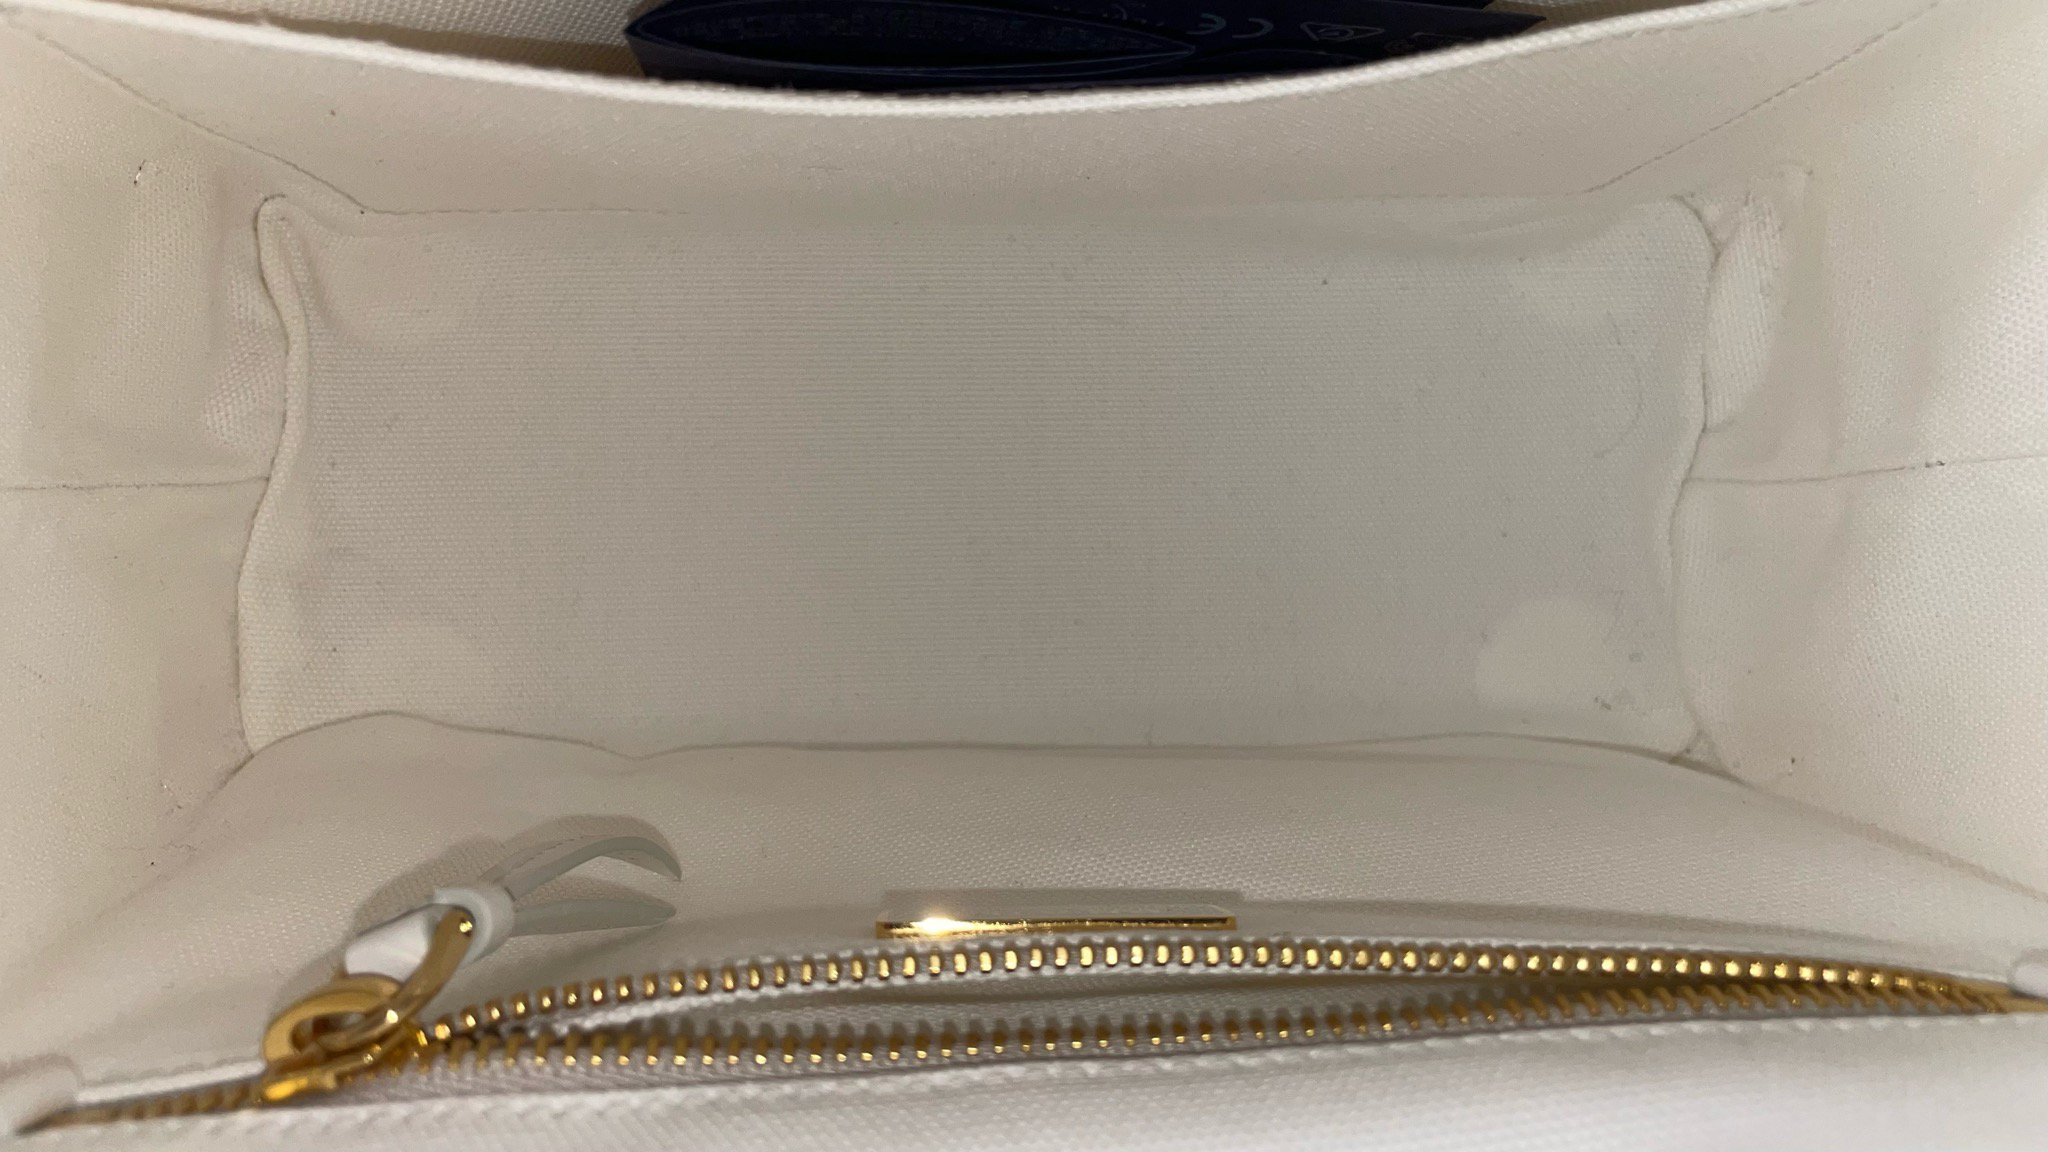 Prada Cahier White with Gold Hardware, Preowned in Dustbag WA001